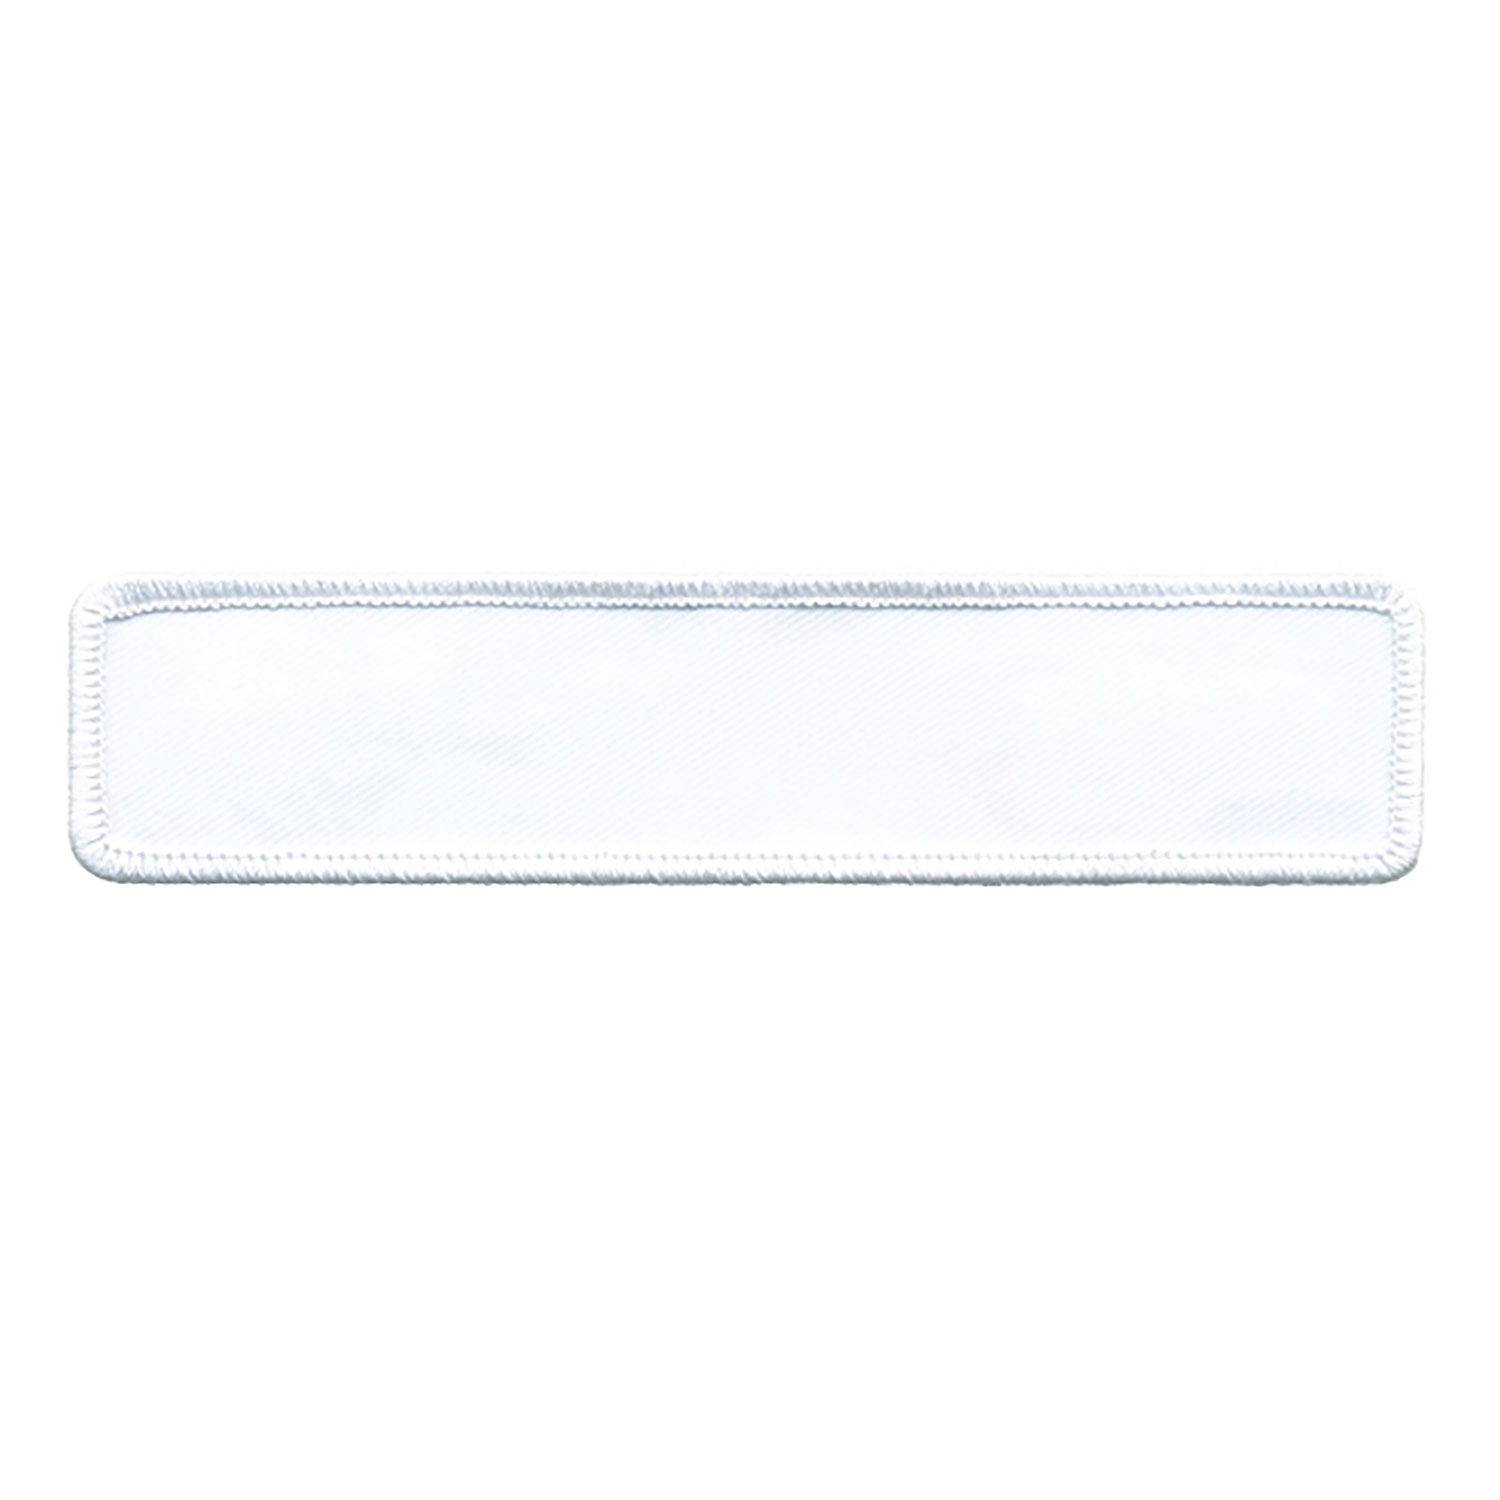 HERO'S PRIDE EMBROIDERABLE BLANK RECTANGLE 1" X 5" (NOT APPL